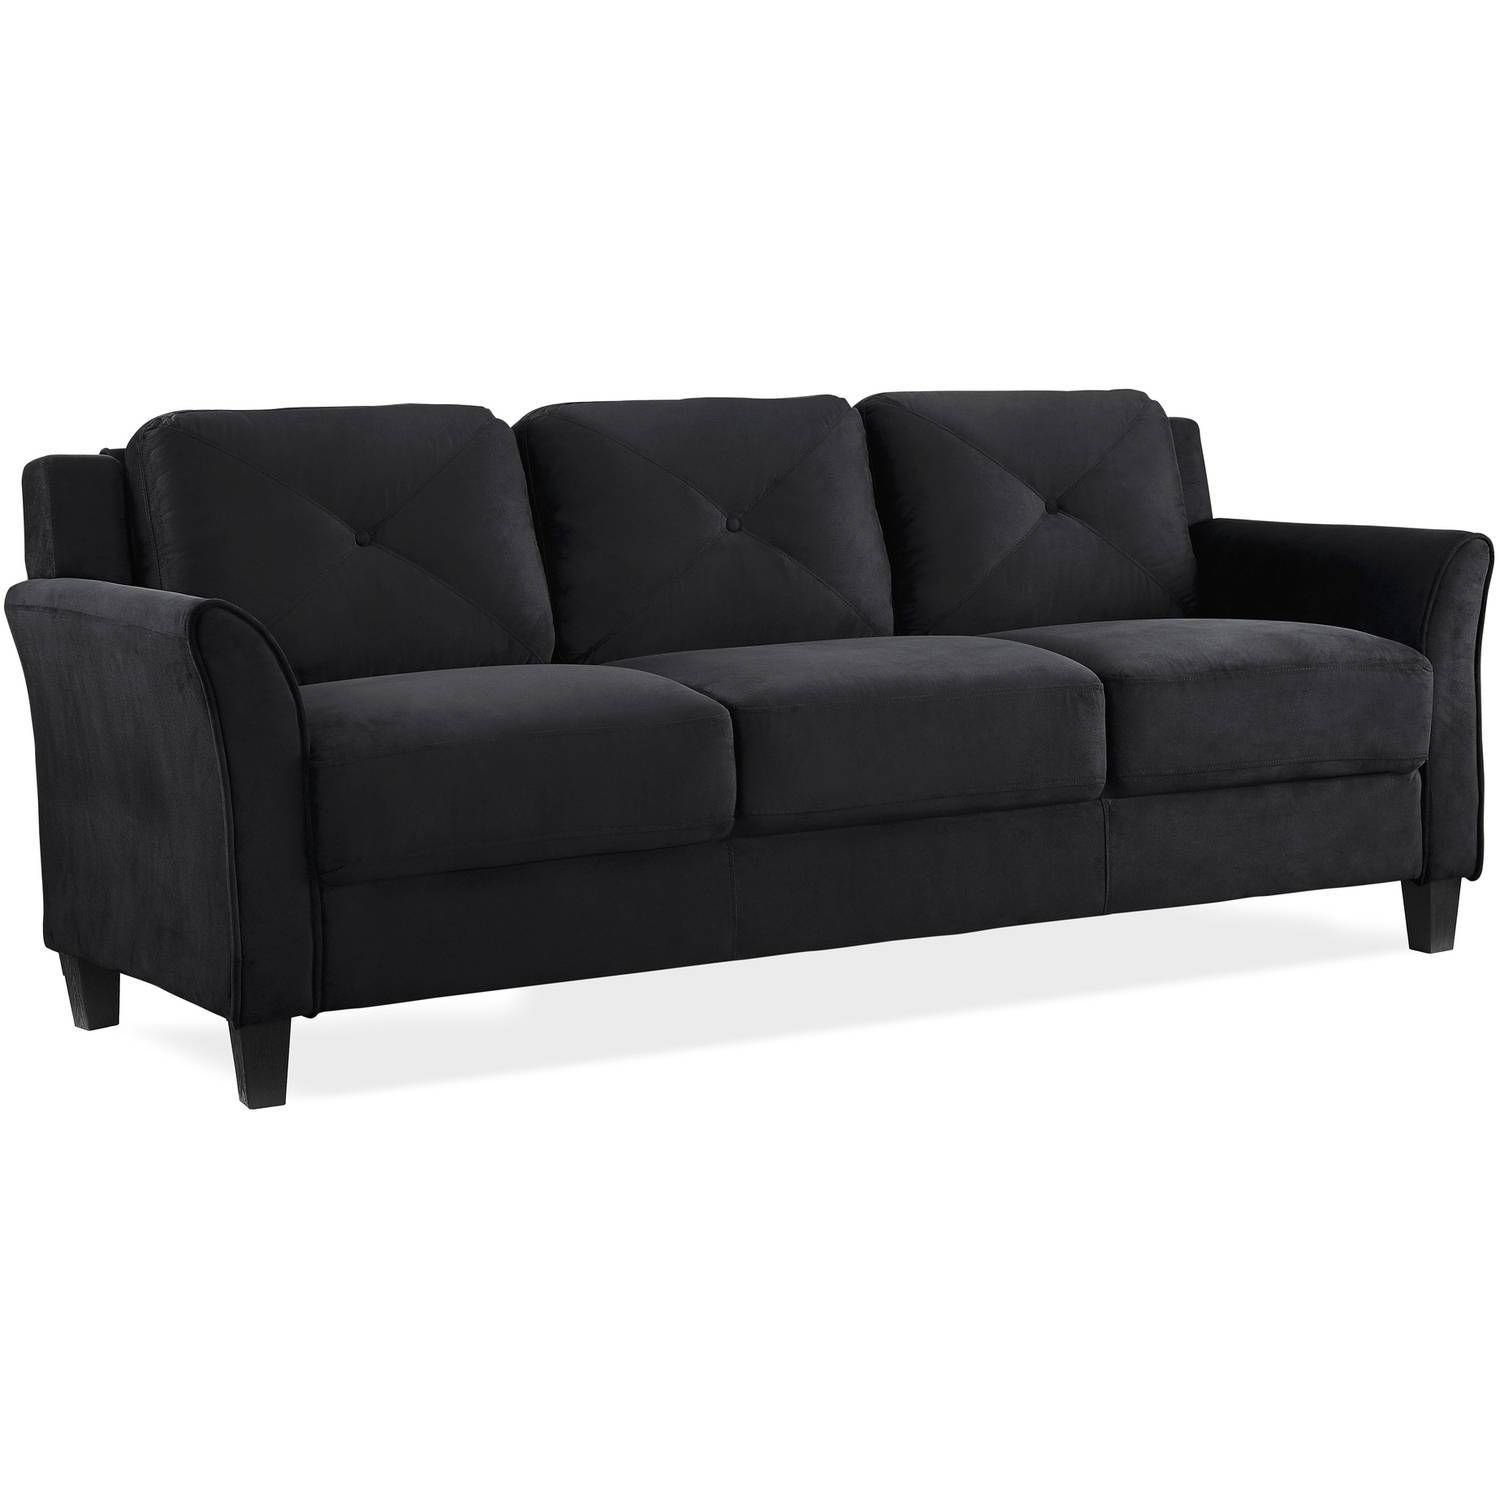 Furniture & Sofa: Couches For Small Spaces | Short Sectional Sofa With Small Spaces Configurable Sectional Sofas (View 15 of 15)